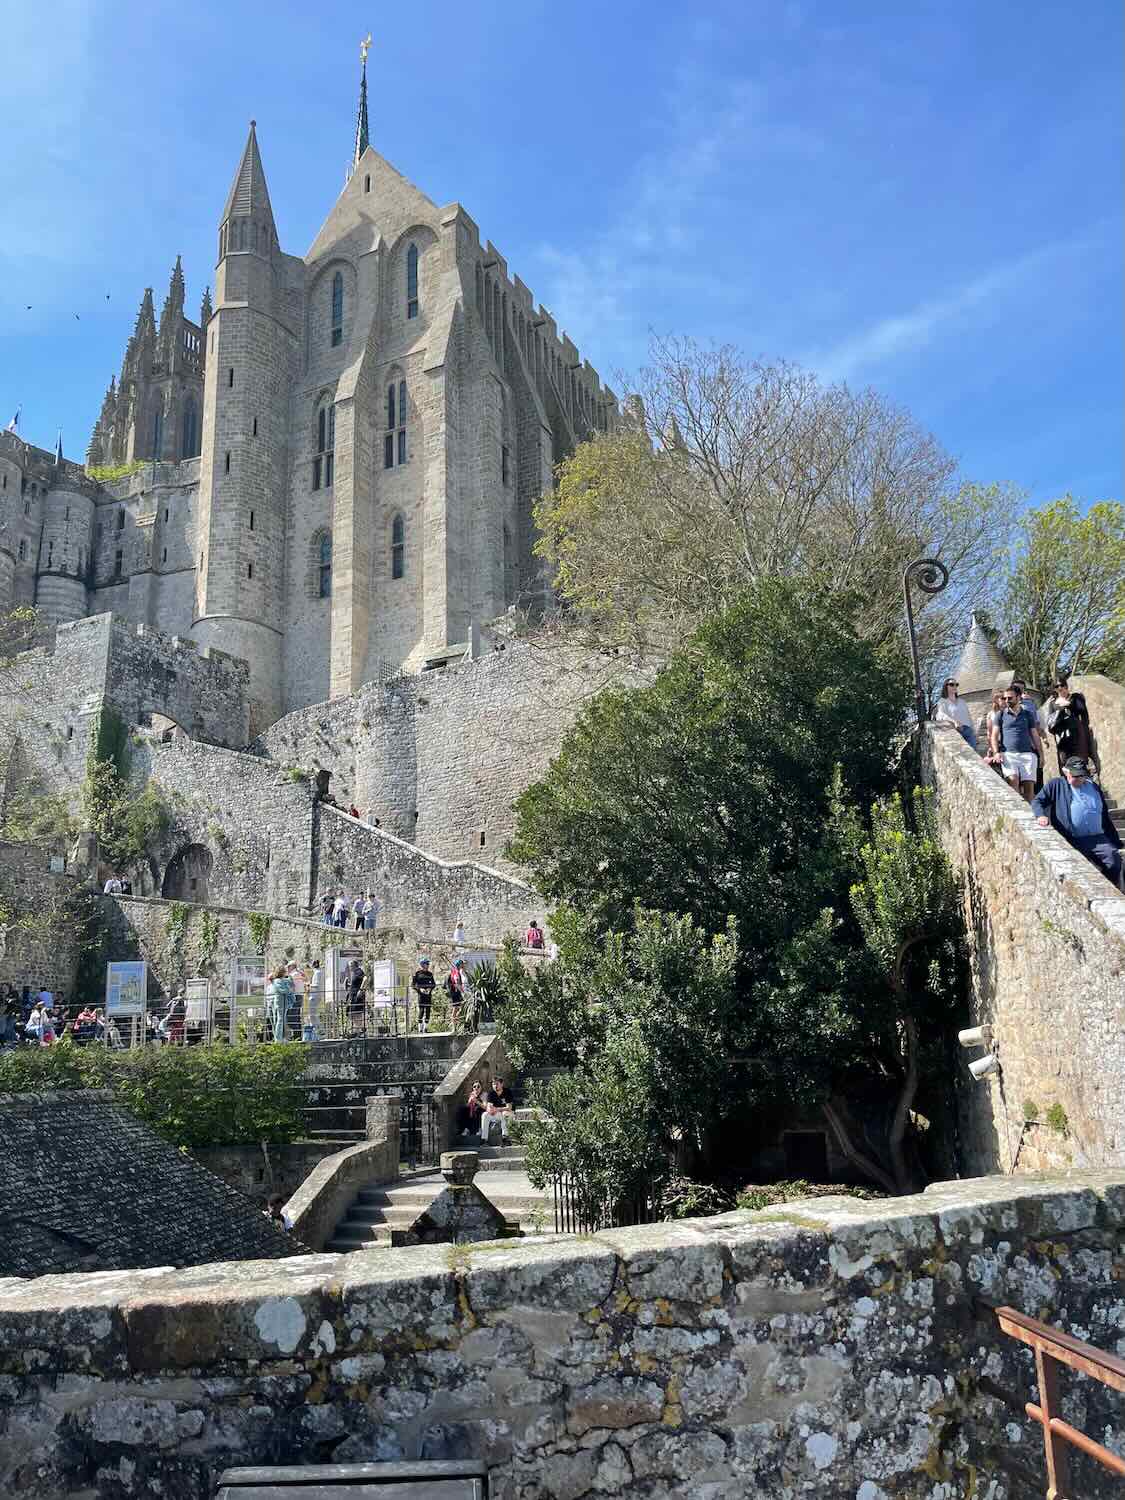 Majestic view of Mont Saint Michel Abbey towering above on rocky foundations, set against a brilliant blue sky.